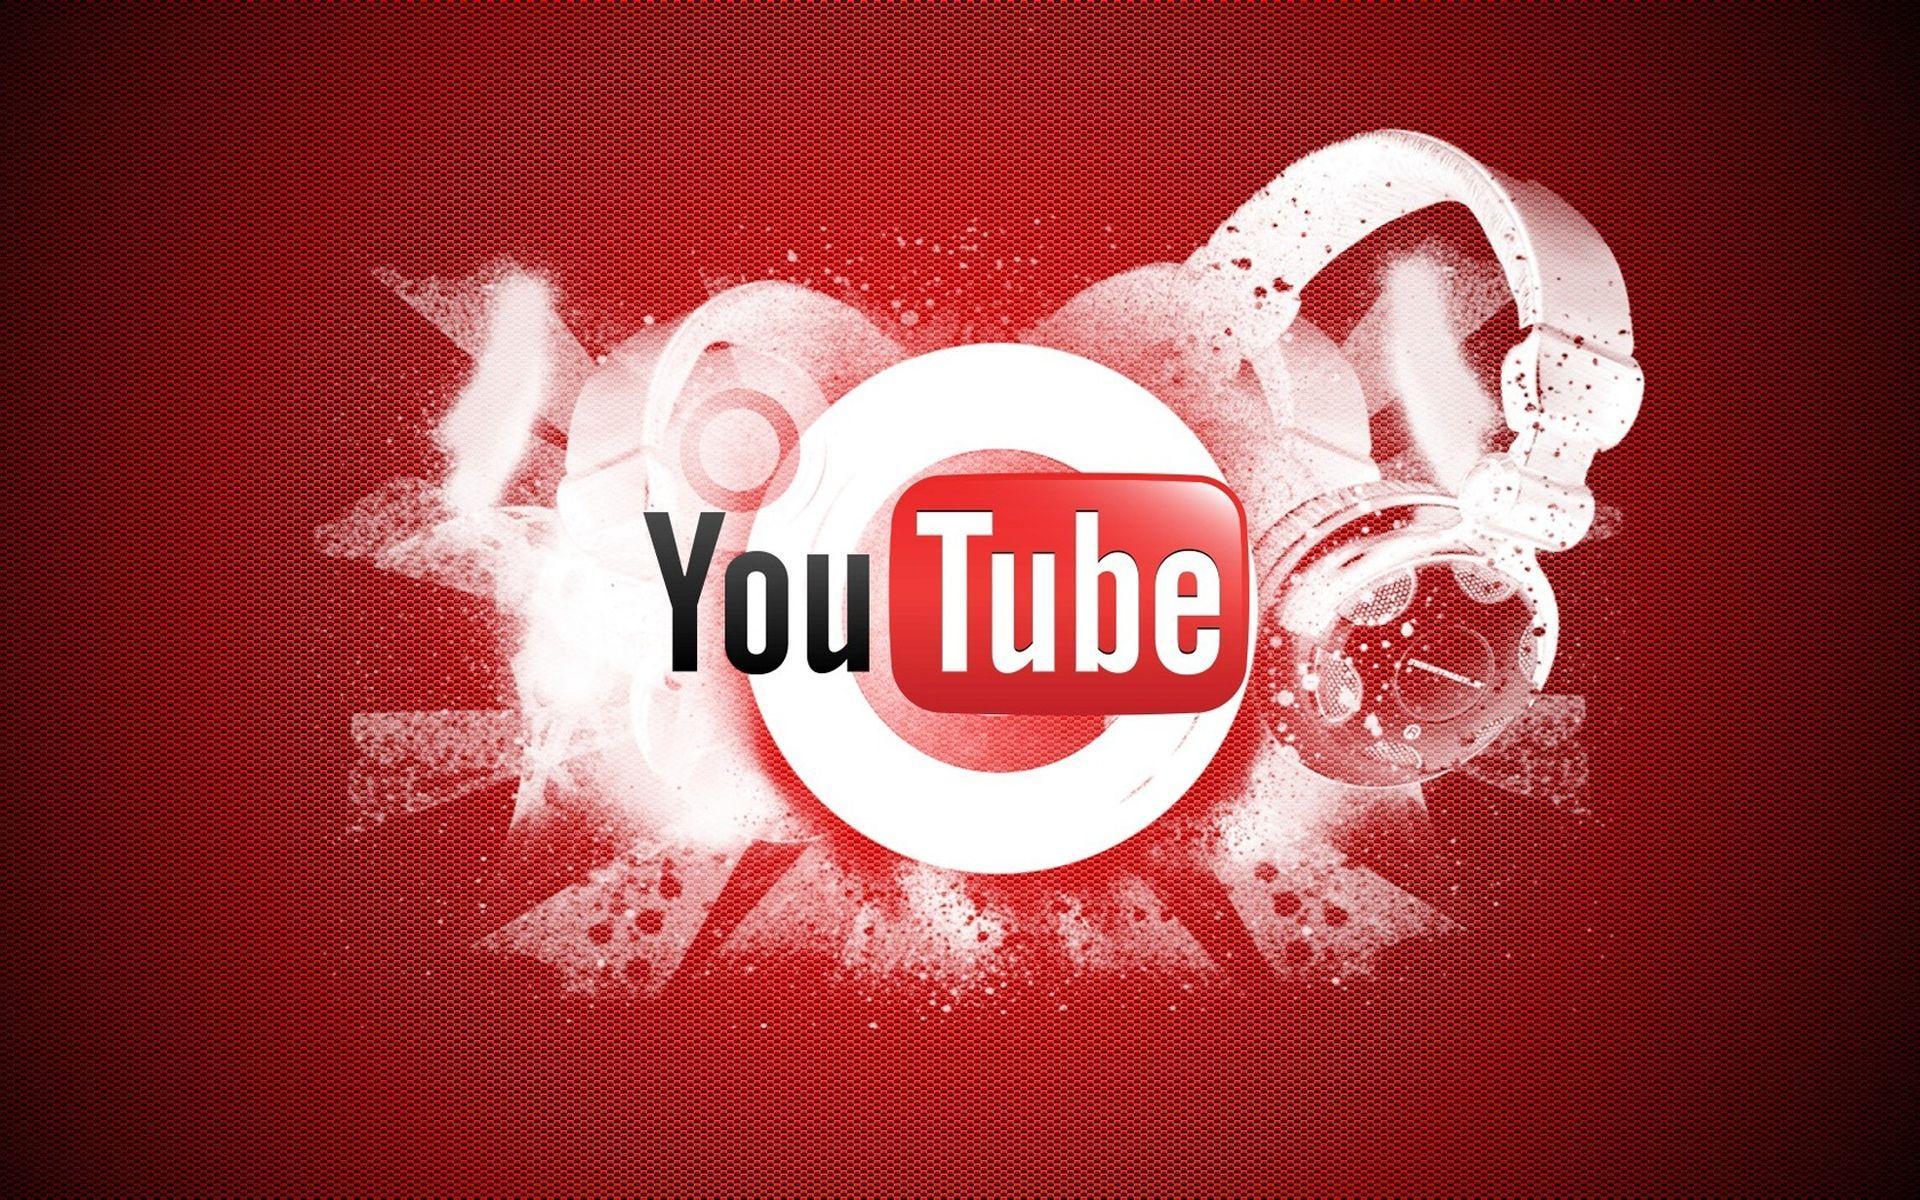 Youtube wallpaper and image, picture, photo